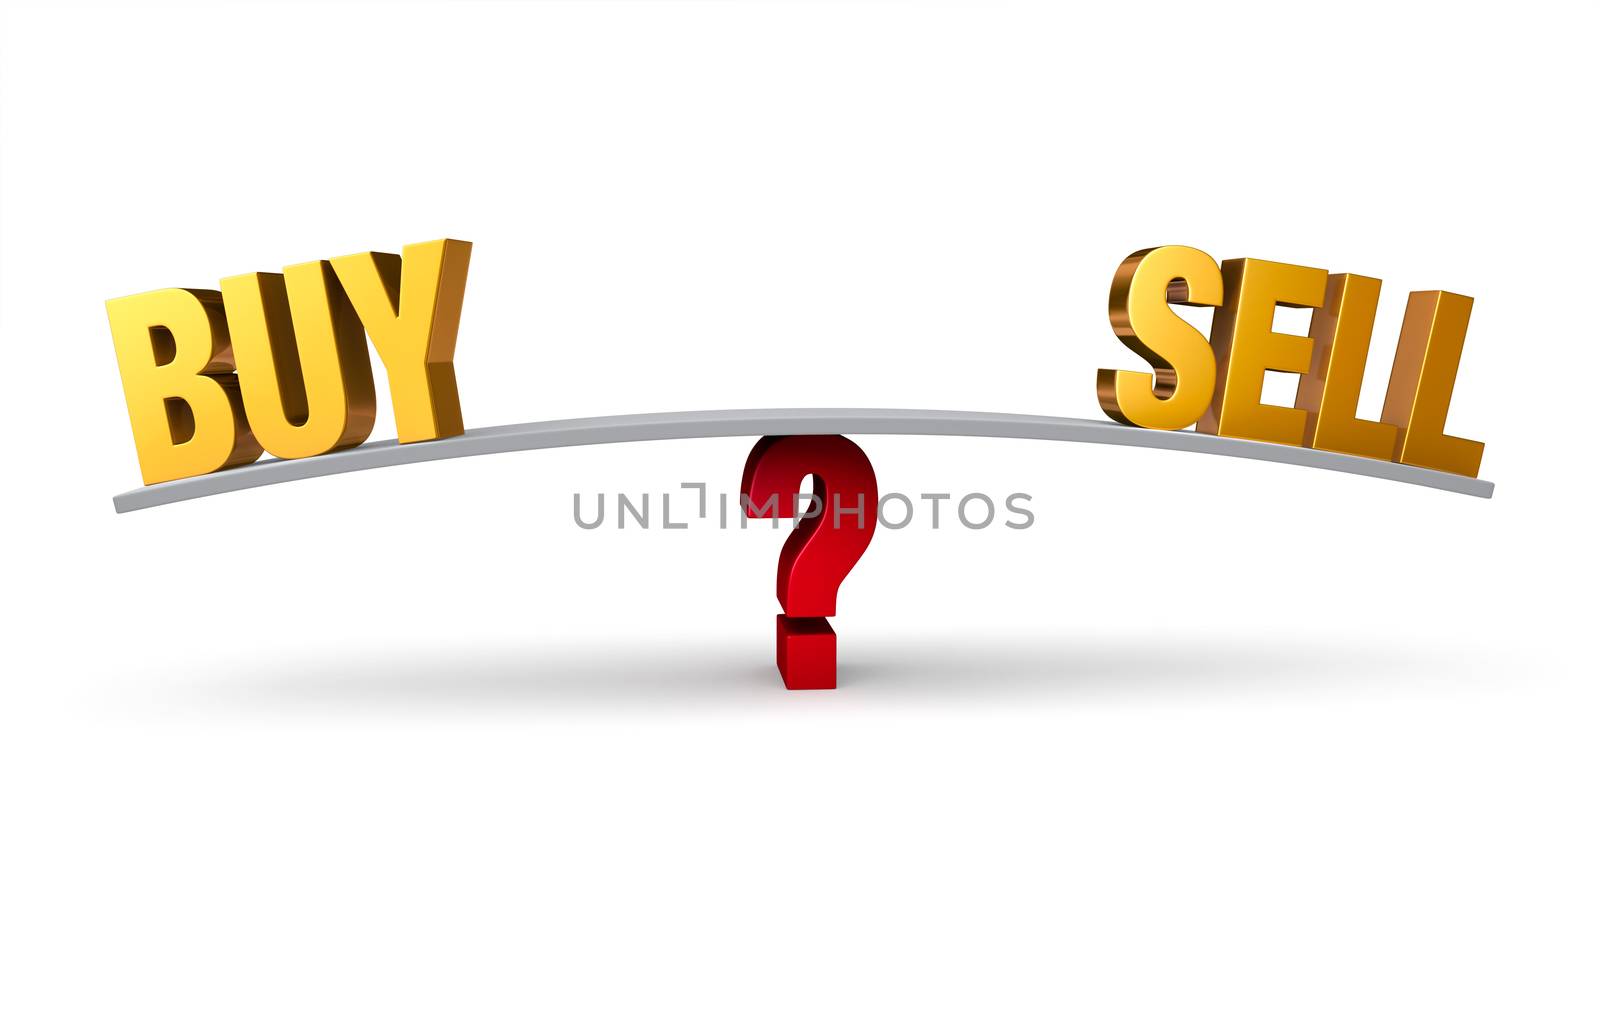 A bright, gold "BUY" and "SELL" sit on opposite ends of a gray board which is balanced on a red question mark. Isolated on white.